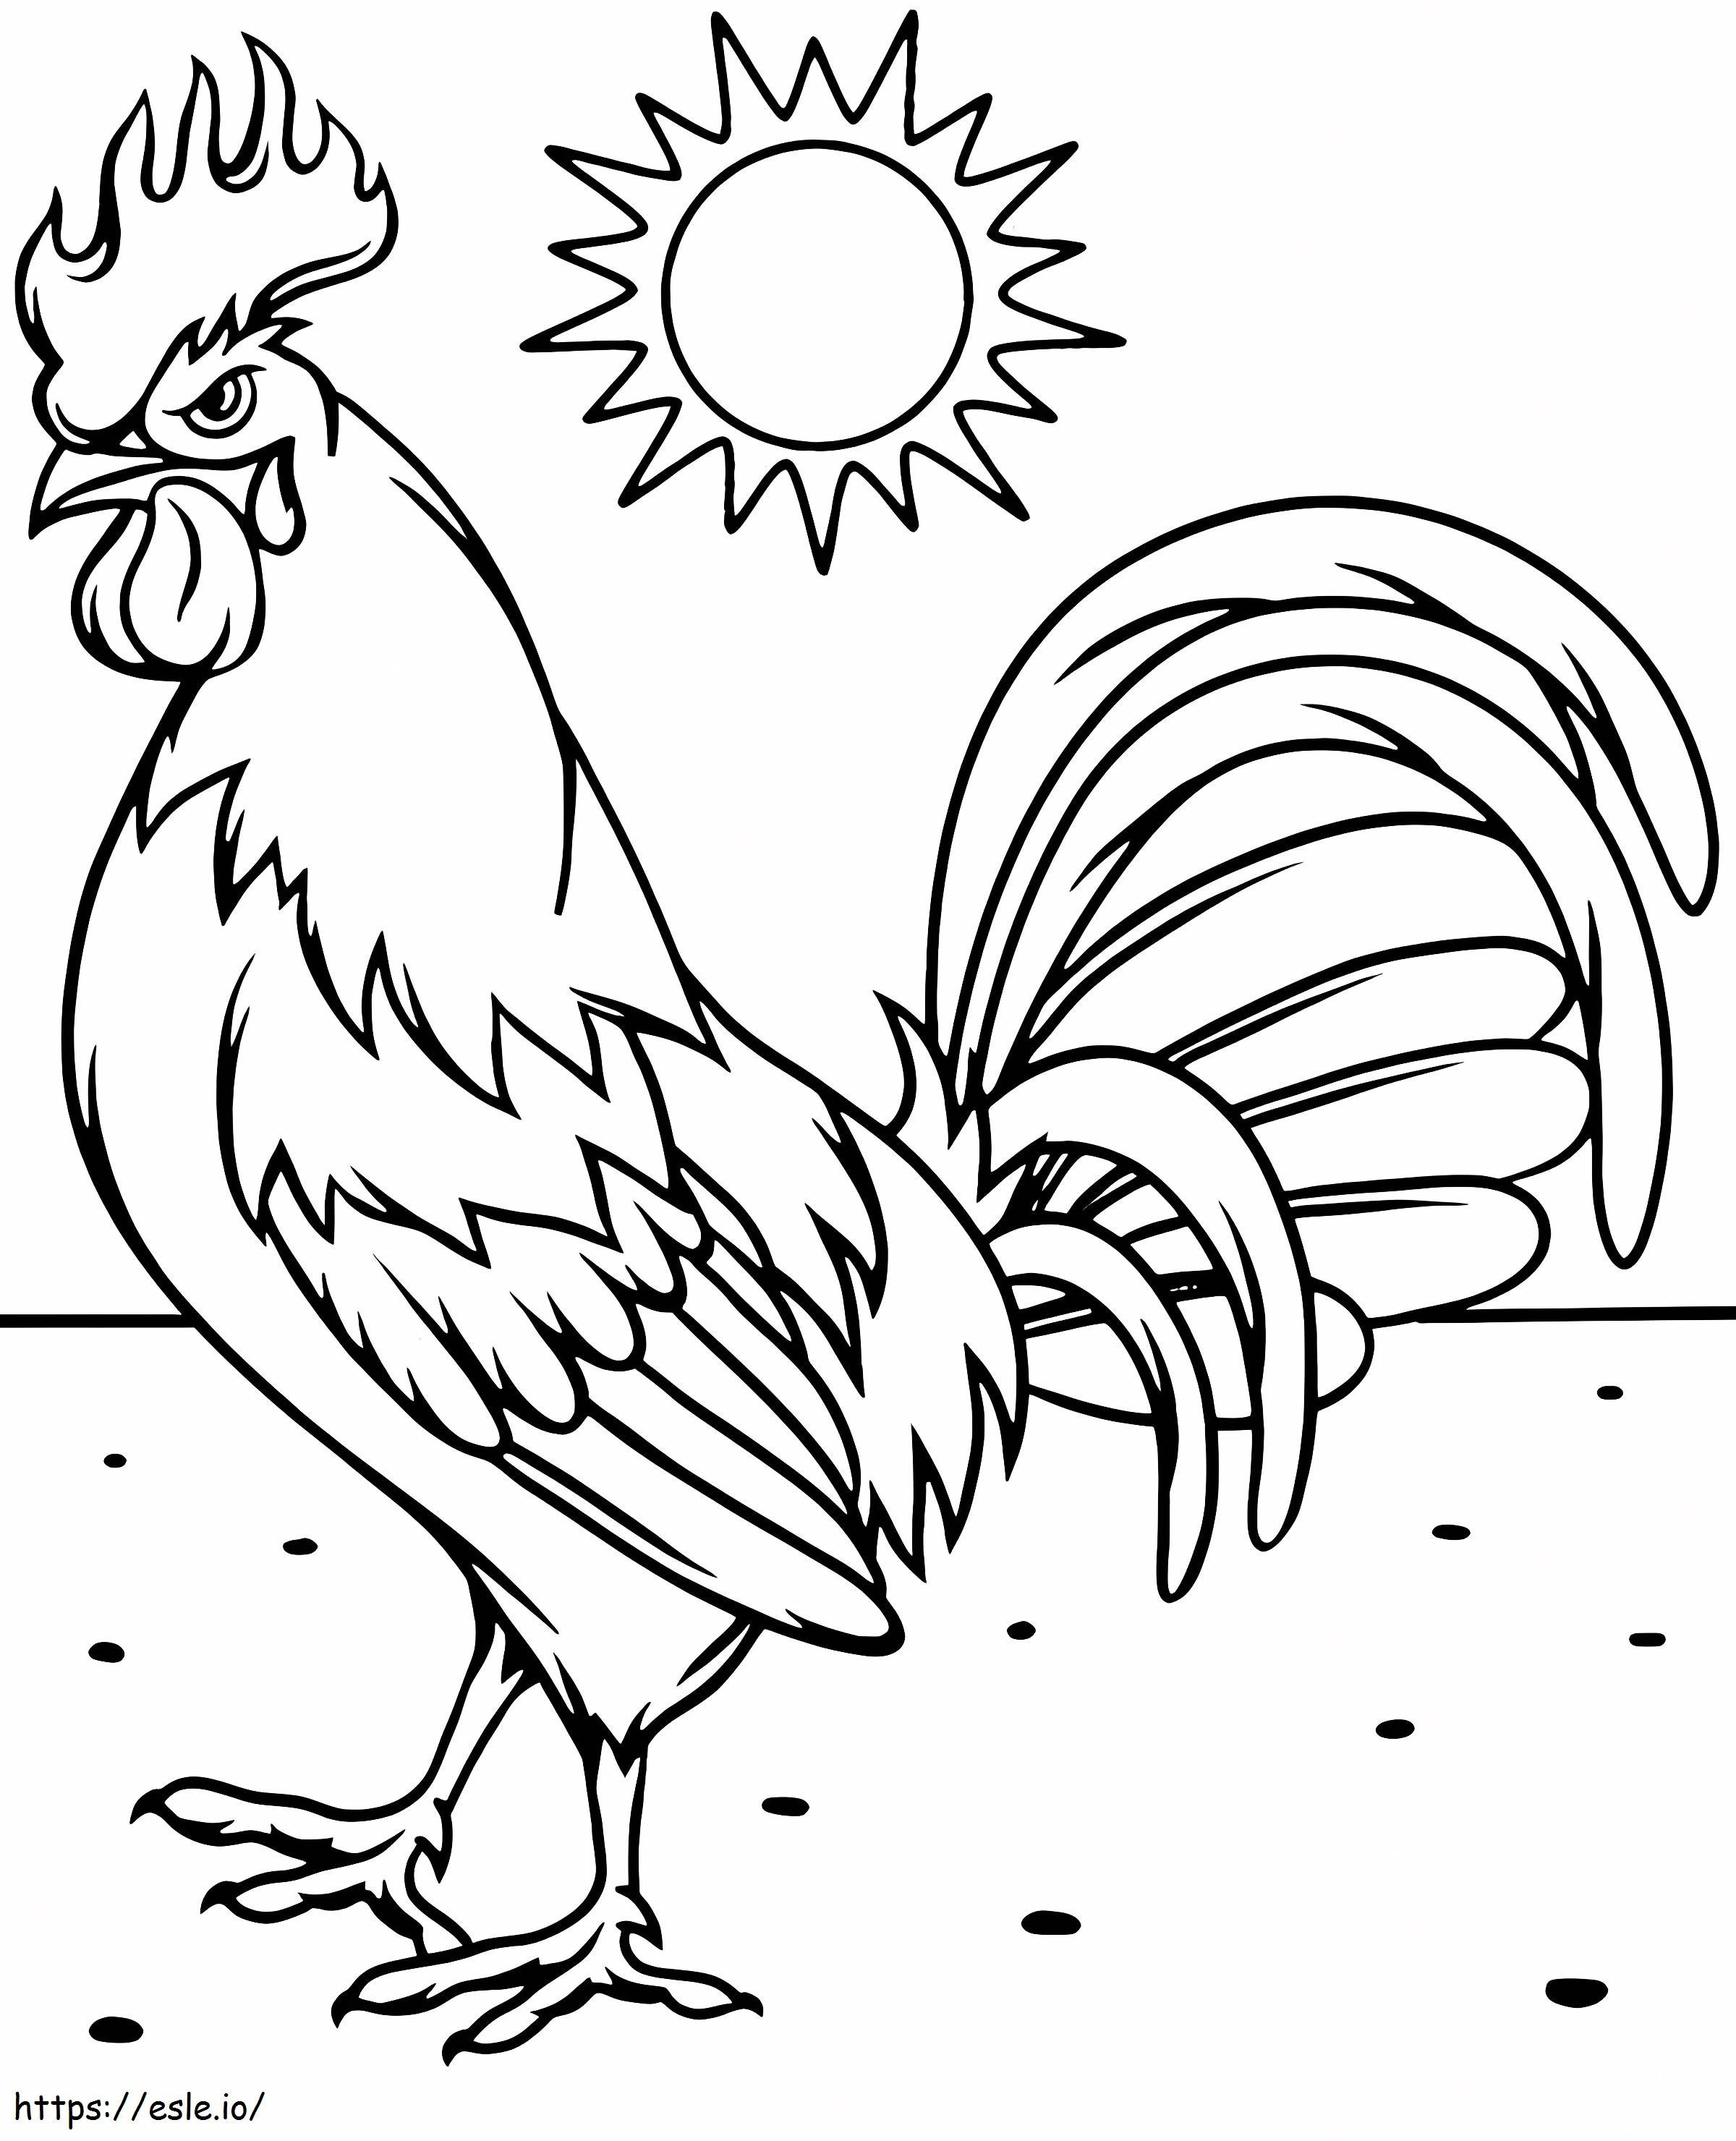 Rooster 2 coloring page